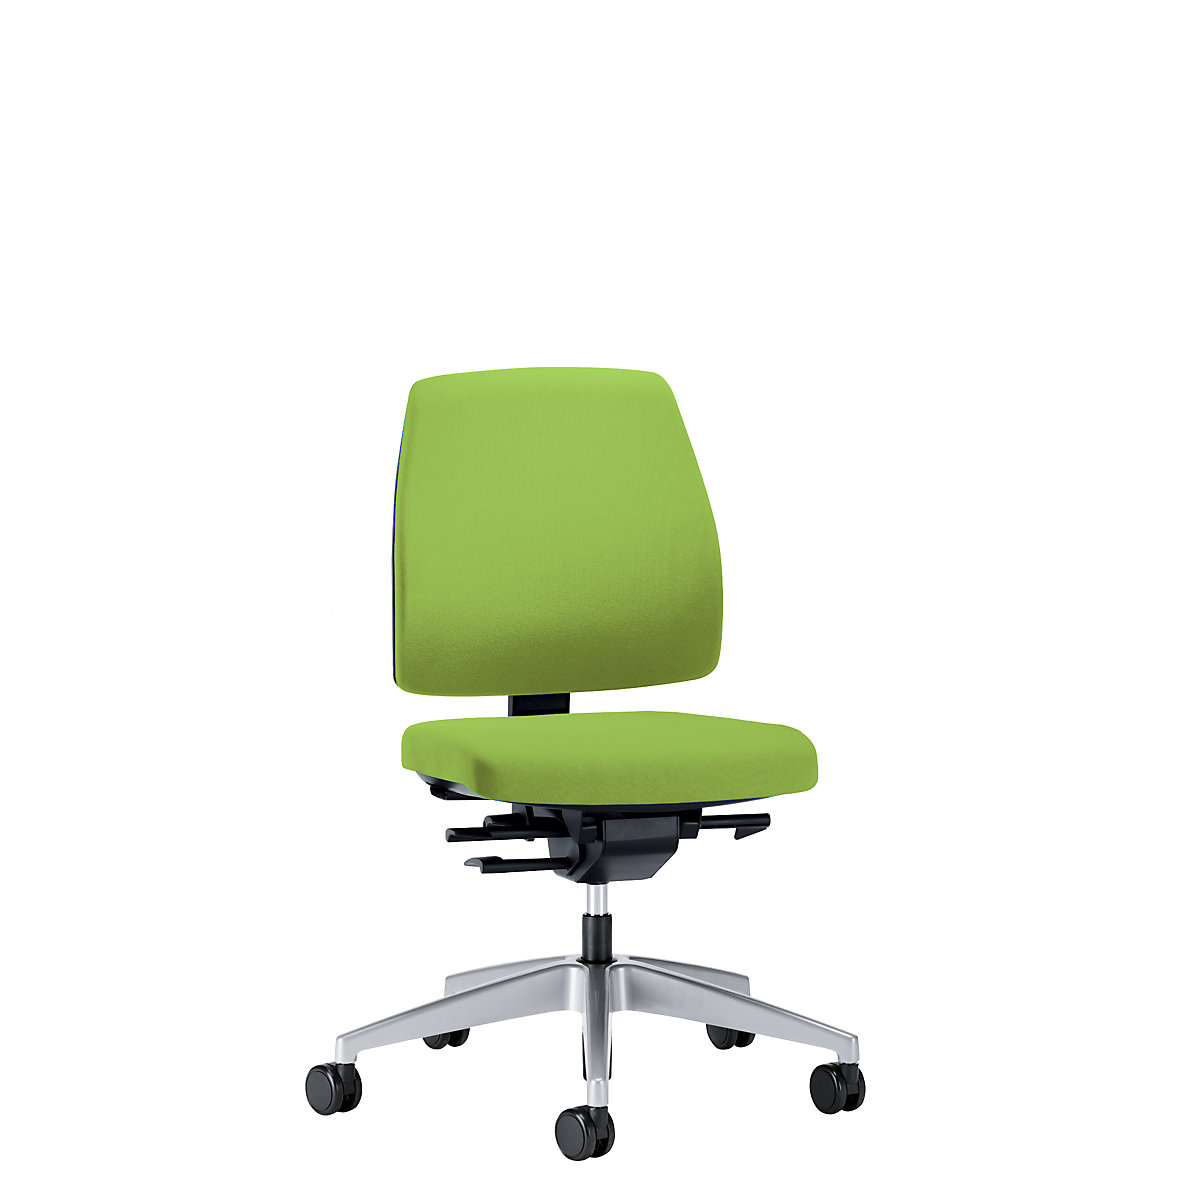 GOAL office swivel chair, back rest height 430 mm – interstuhl, brilliant silver frame, with soft castors, yellow green, seat depth 410 mm-3